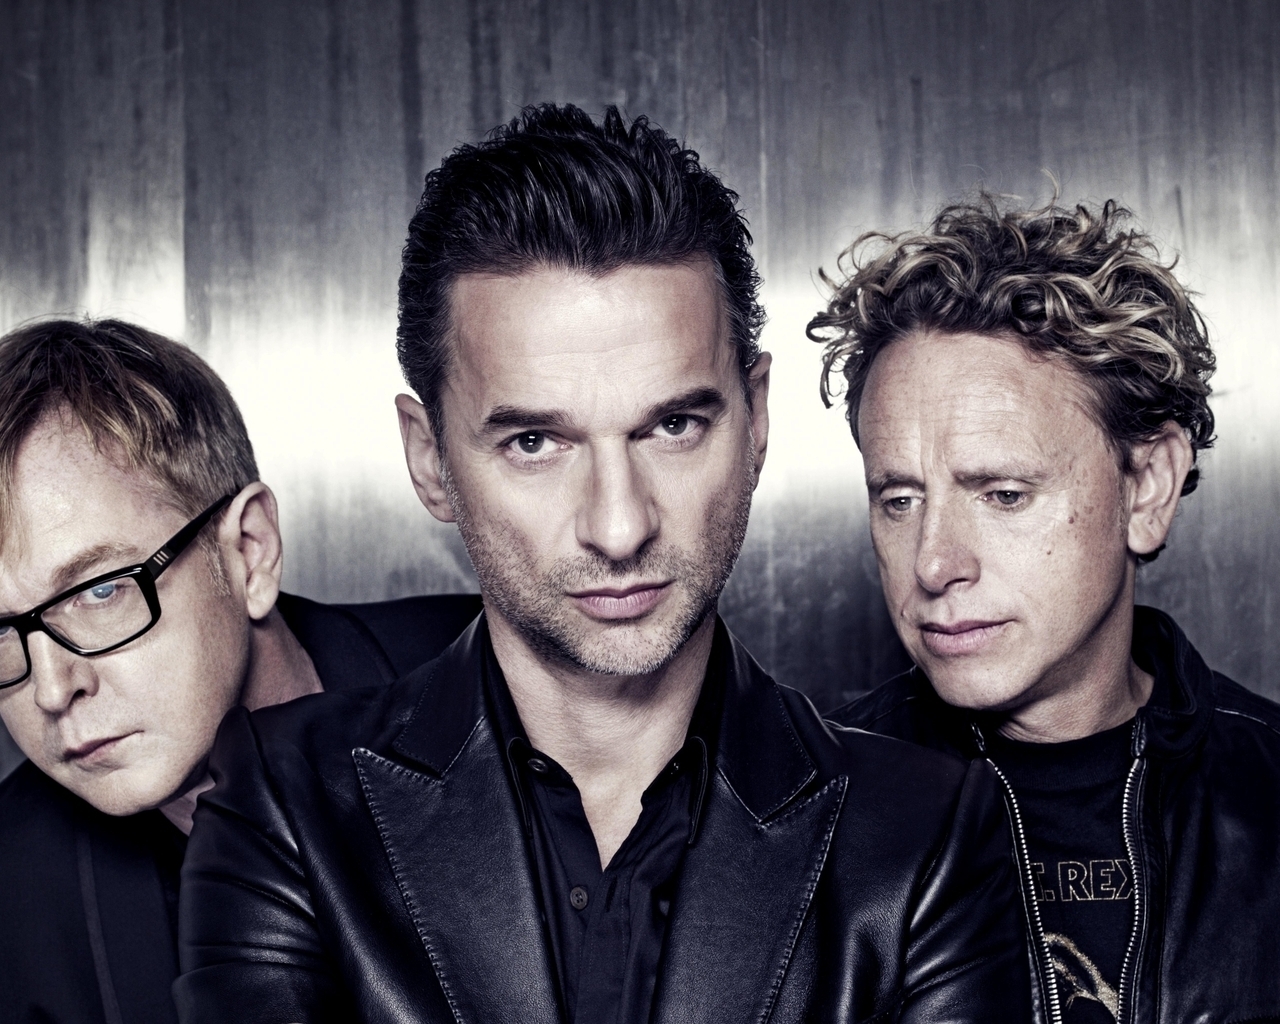 Depeche Mode Poster for 1280 x 1024 resolution